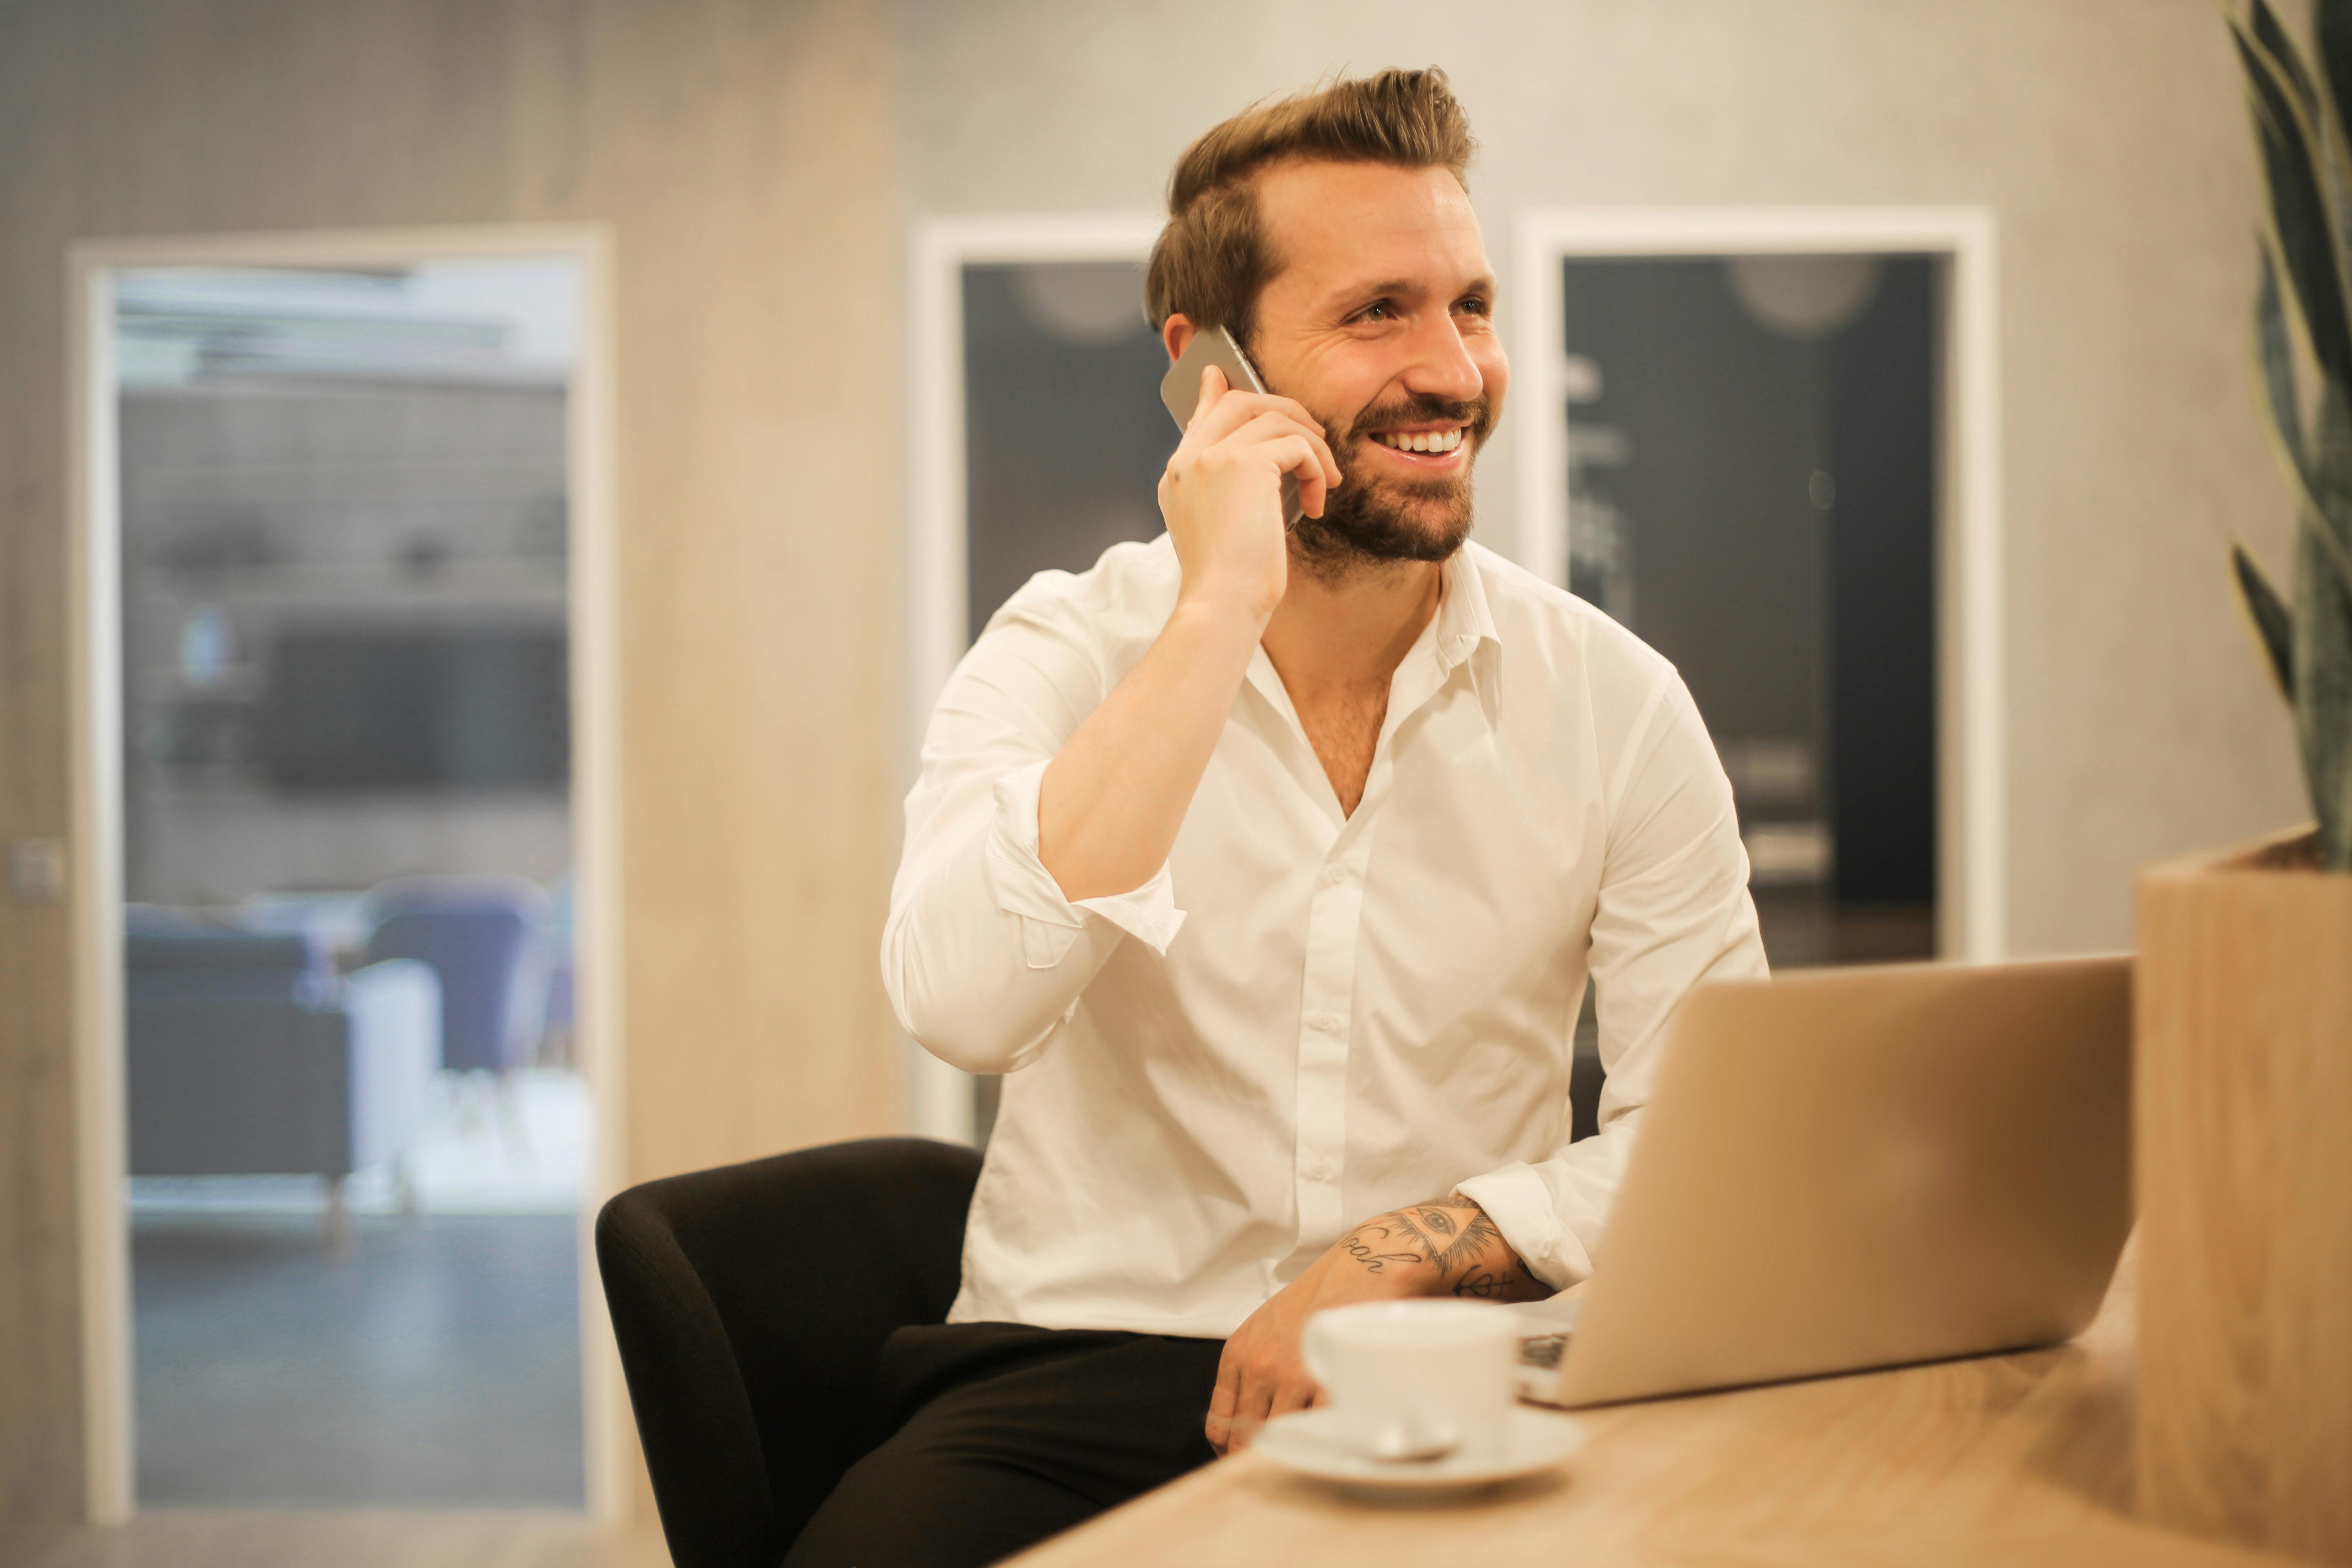 A happy man on a call | Source: Pexels